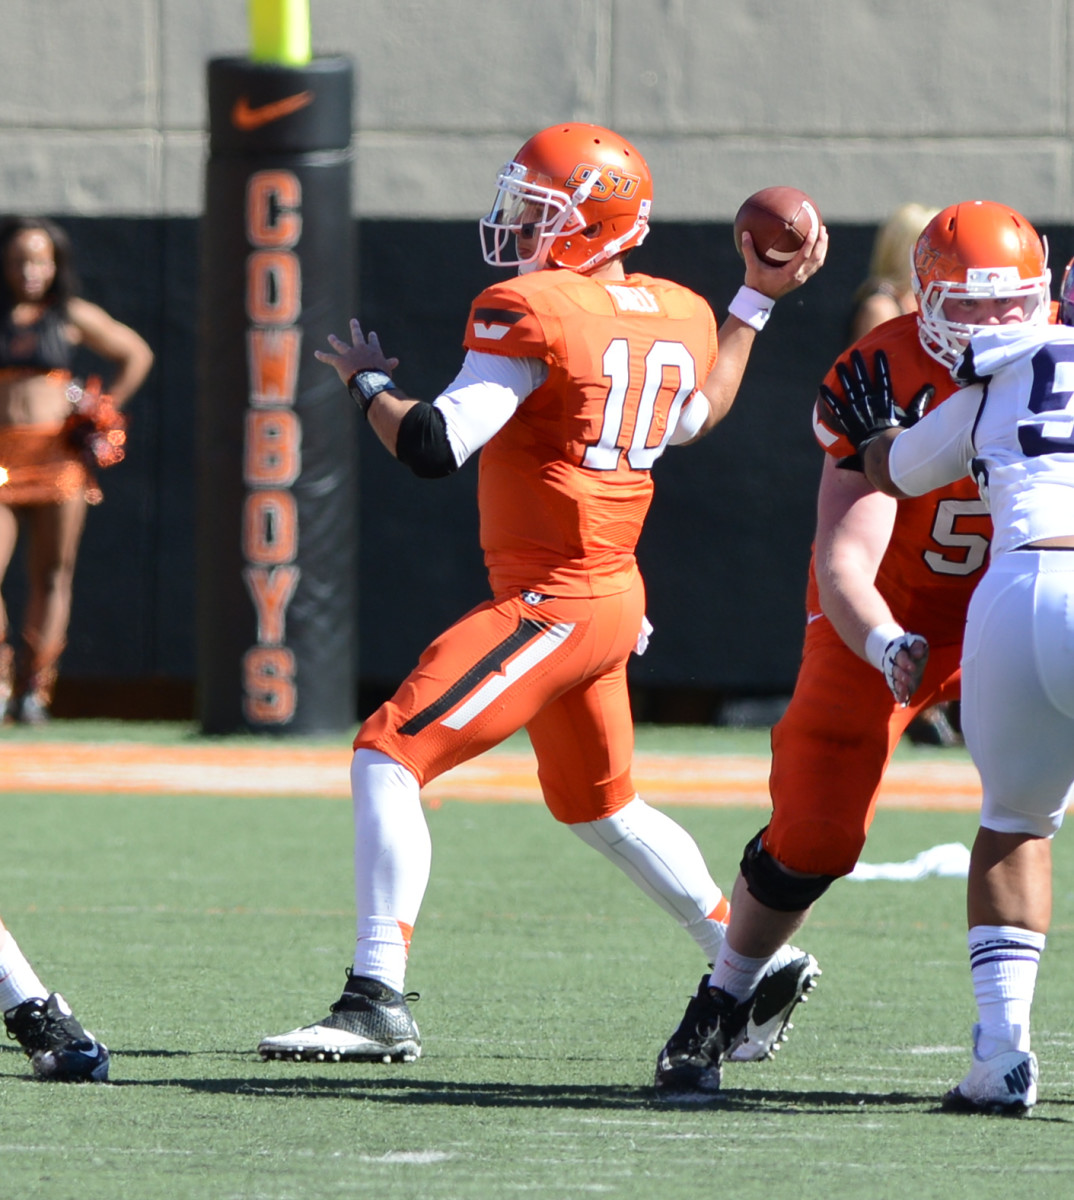 Clint Chelf turned out to be a dangerous dual threat quarterback in the Oklahoma State offense. 